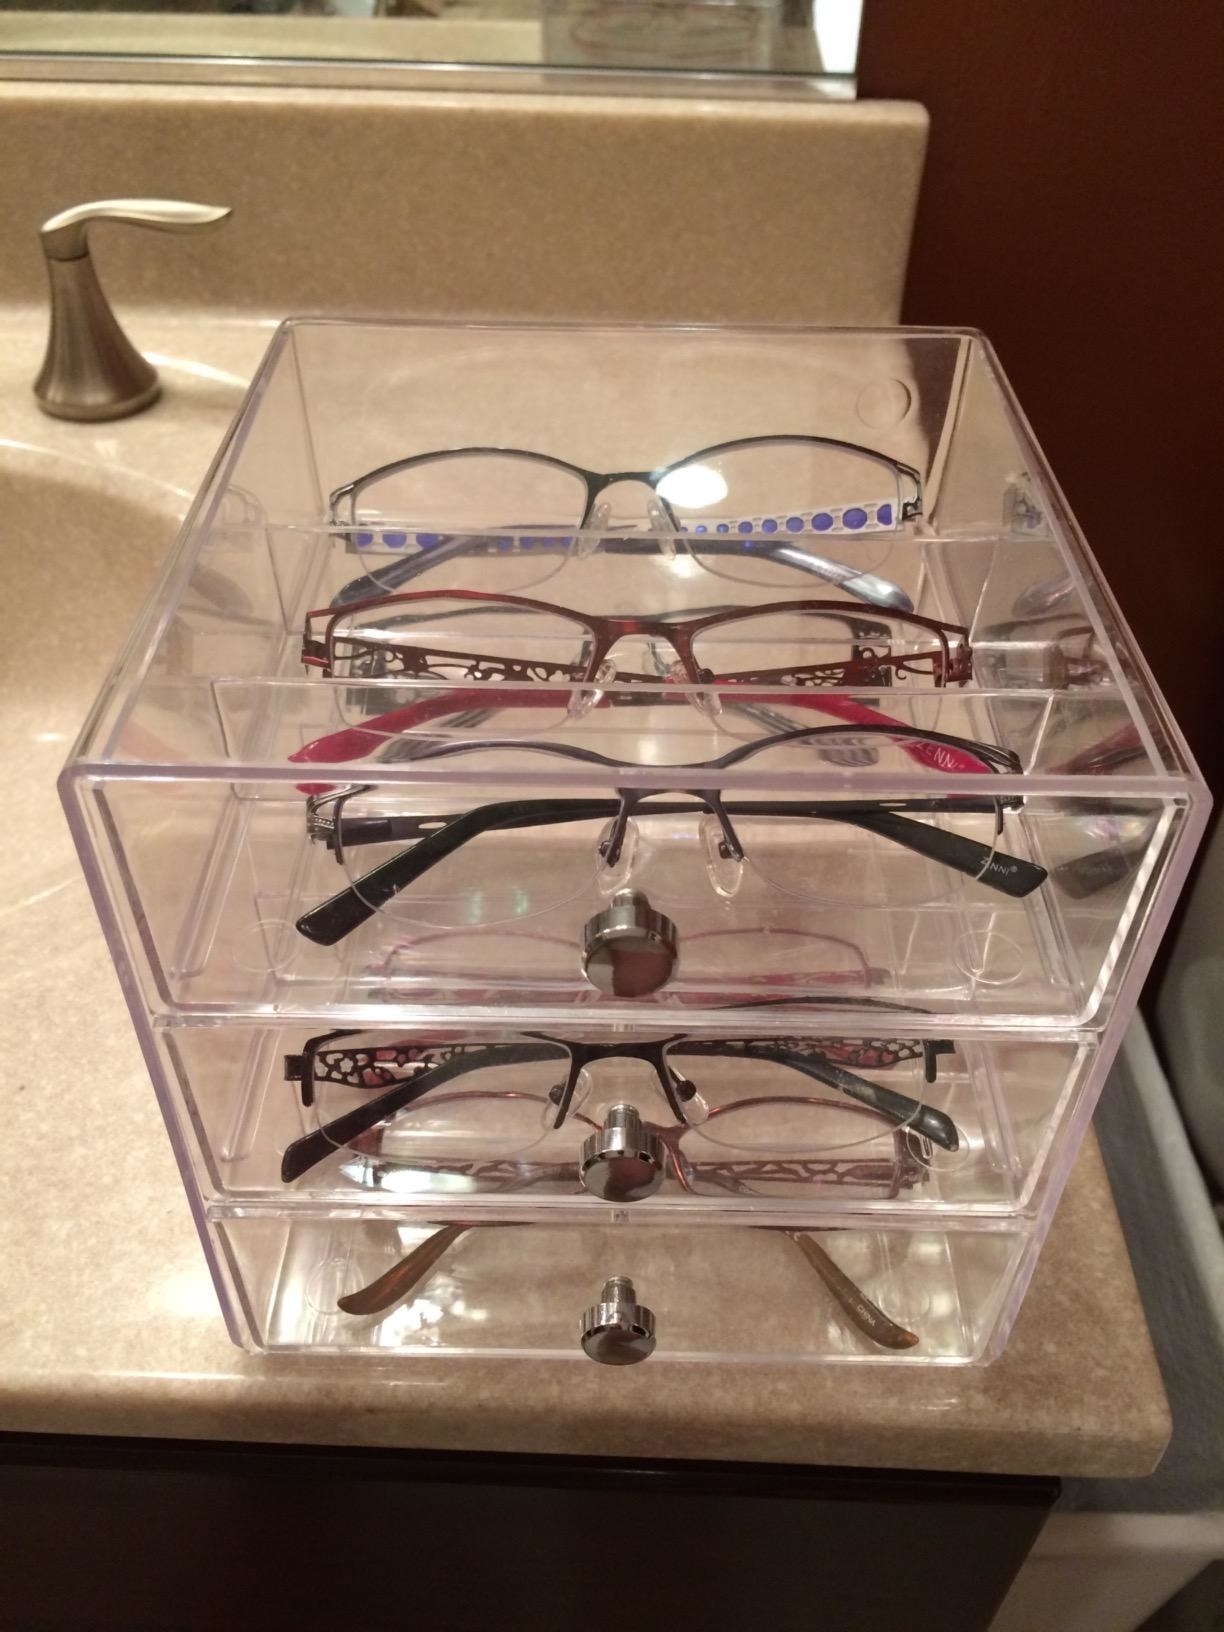 a collection of eye classes organized throughout the the shelves of the acrylic drawer